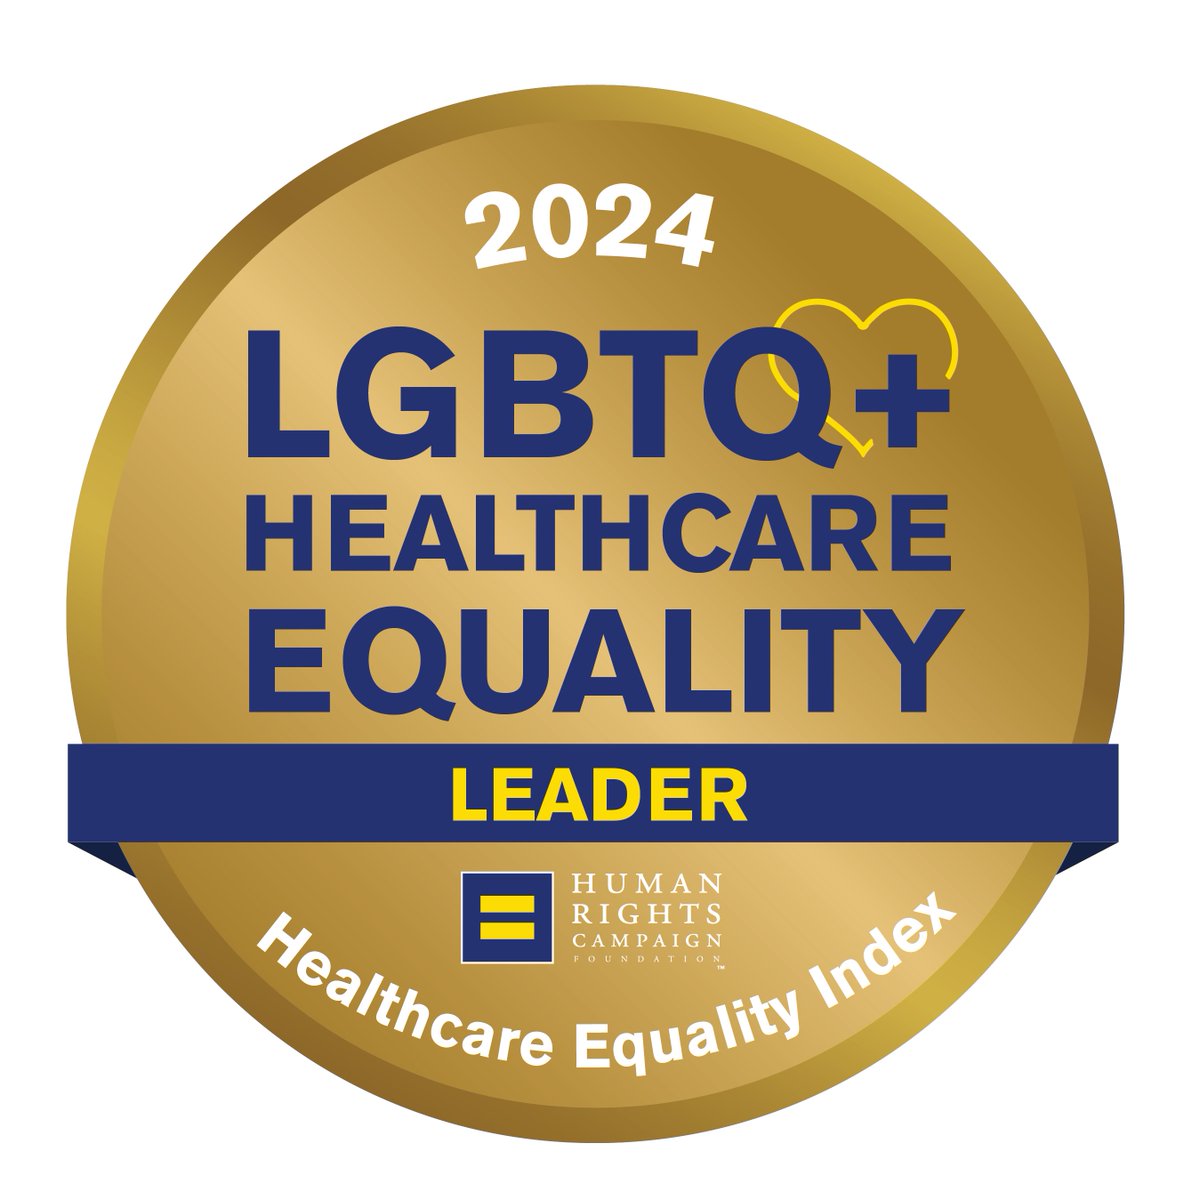 We're proud to announce that many of our facilities have been recognized and designated as “Leaders in LGBTQ+ Healthcare Equality” by the Human Rights Campaign (HRC) Foundation, the educational arm of America's largest civil rights organization working to achieve equality for…